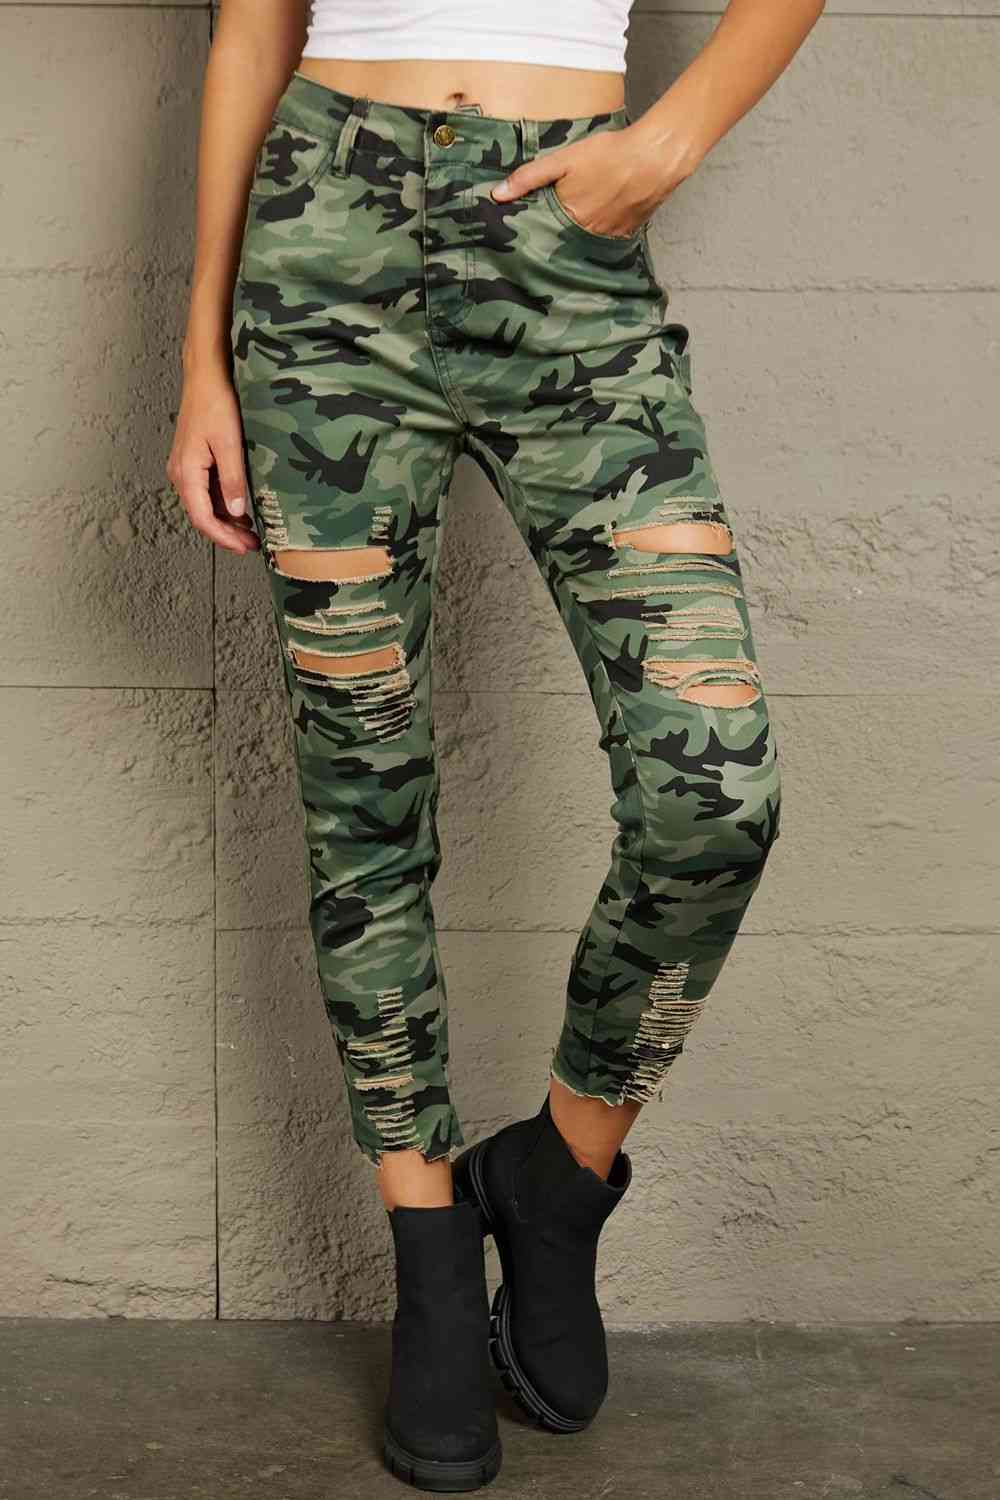 Baeful Distressed Camouflage Jeans